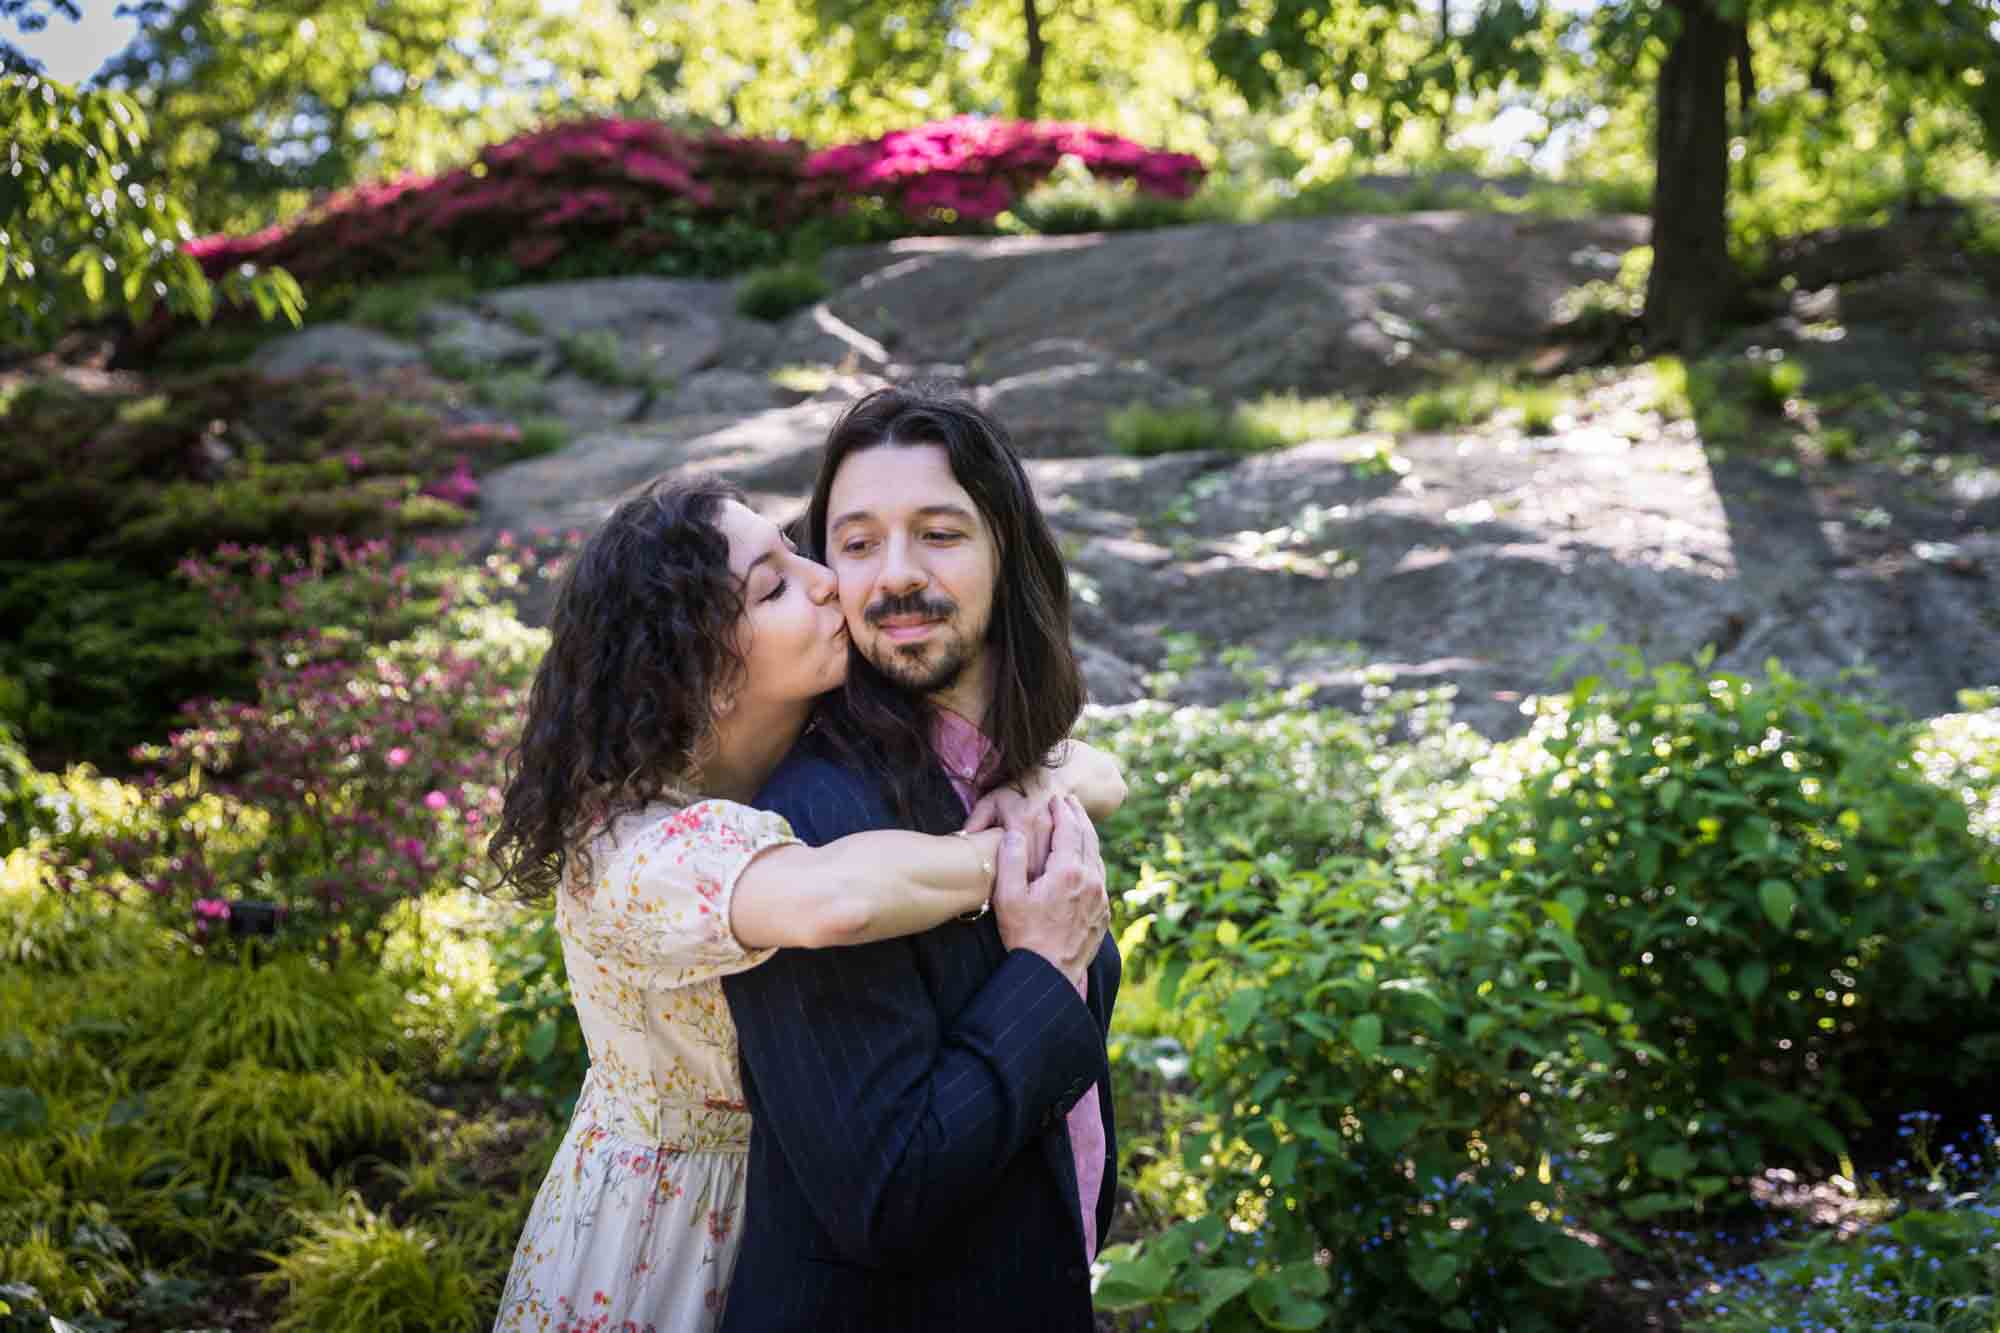 New York Botanical Garden engagement photos of woman kissing man on the cheek in front of garden